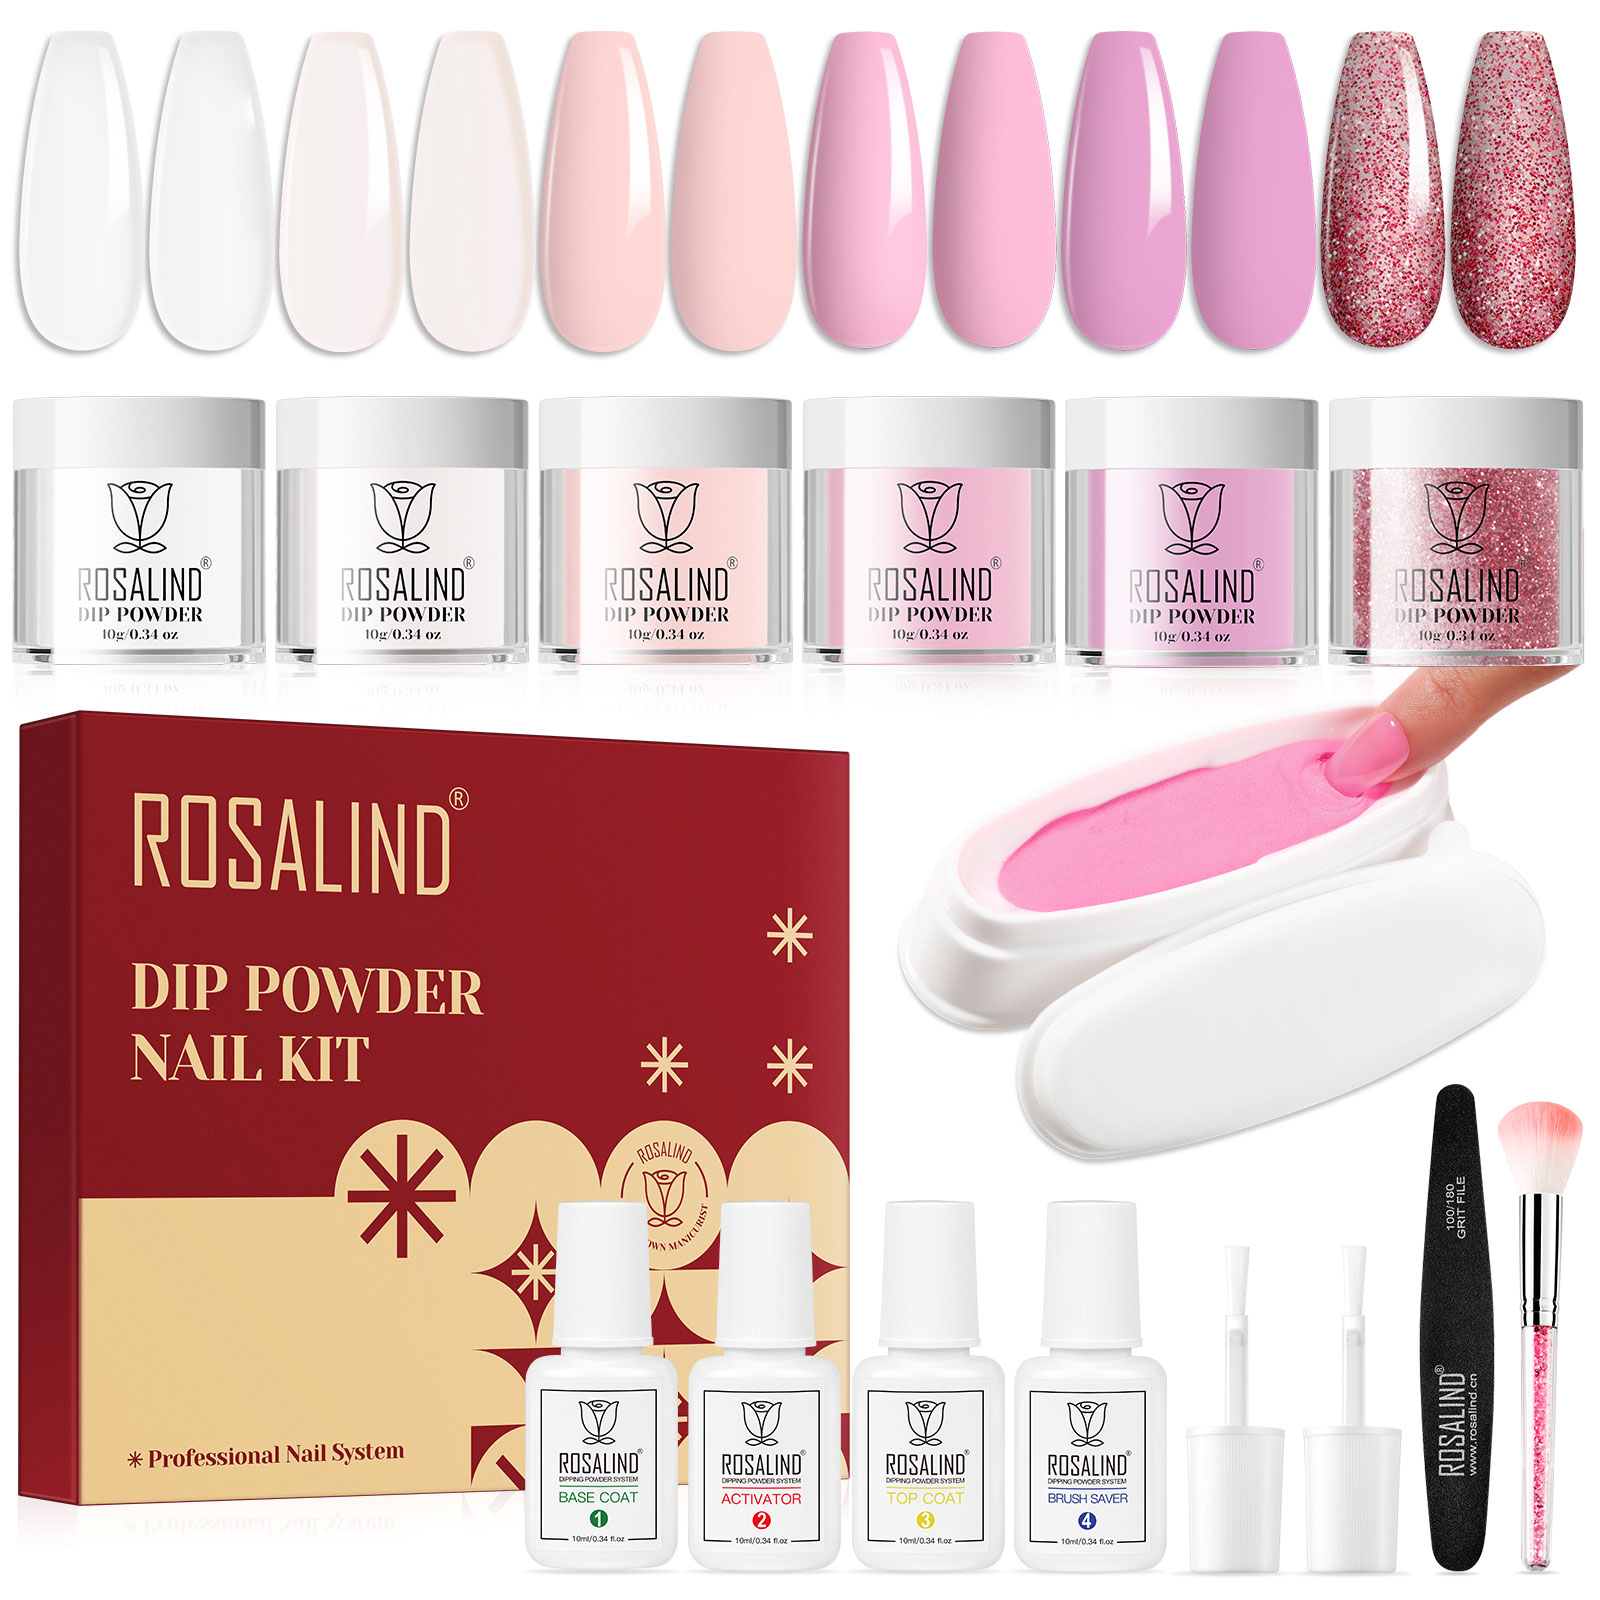 ROSALIND manicure soaking powder sticky manicure powder set boxed nude pink manicure supplies for nail salons